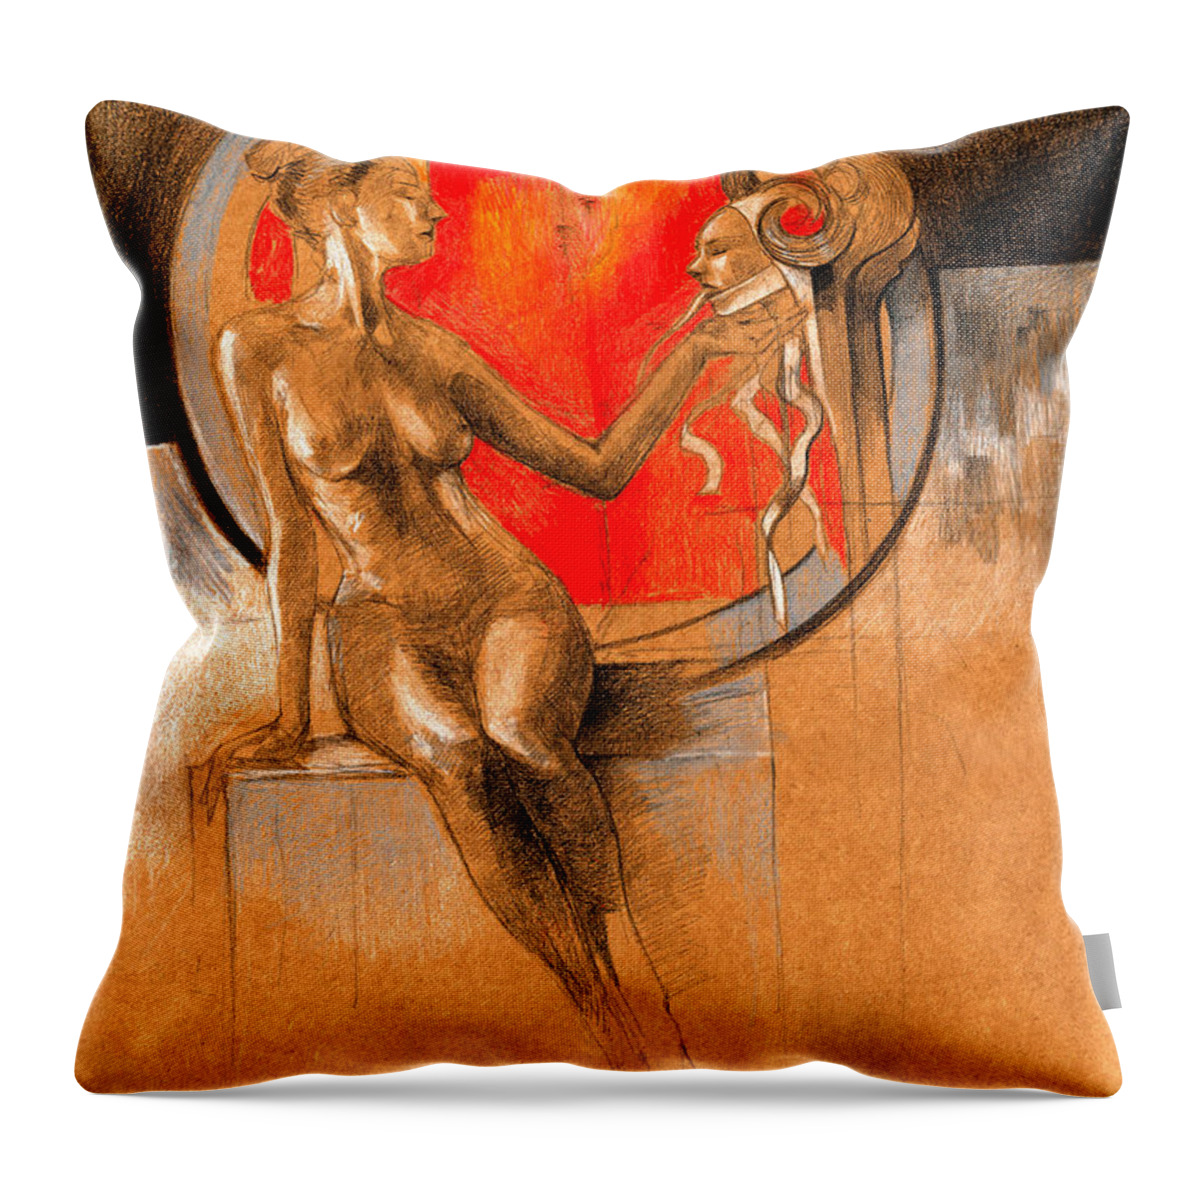 Devil Throw Pillow featuring the painting Devil Inside by Ertan Aktas